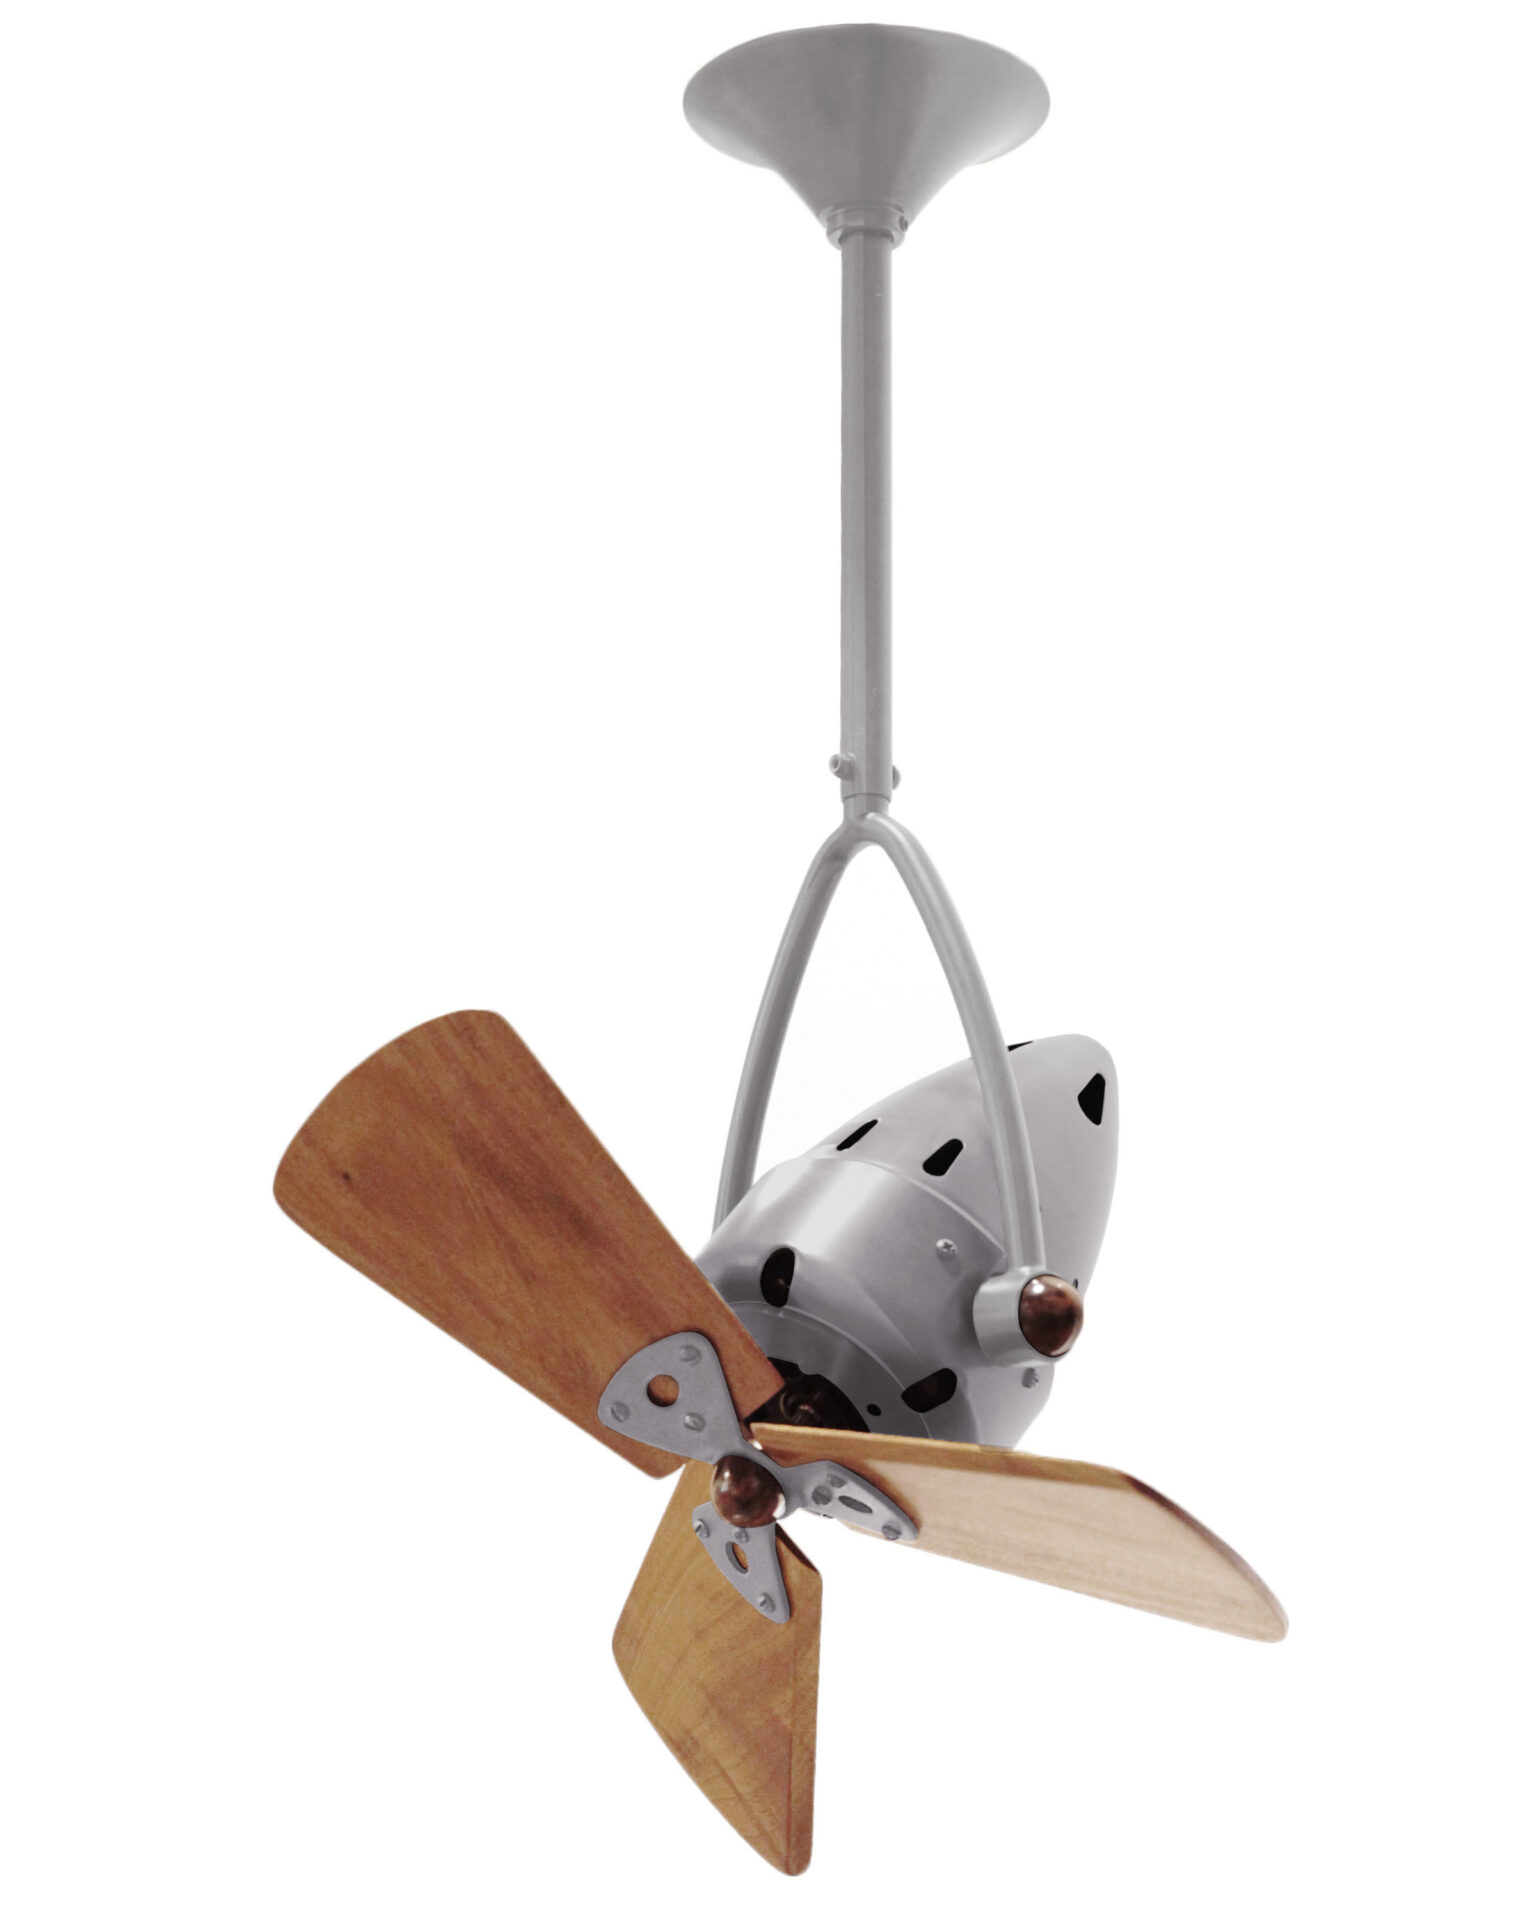 Jarold Direcional ceiling fan in Brushed Nickel finish with solid mahogany blades made by Matthews Fan Company.